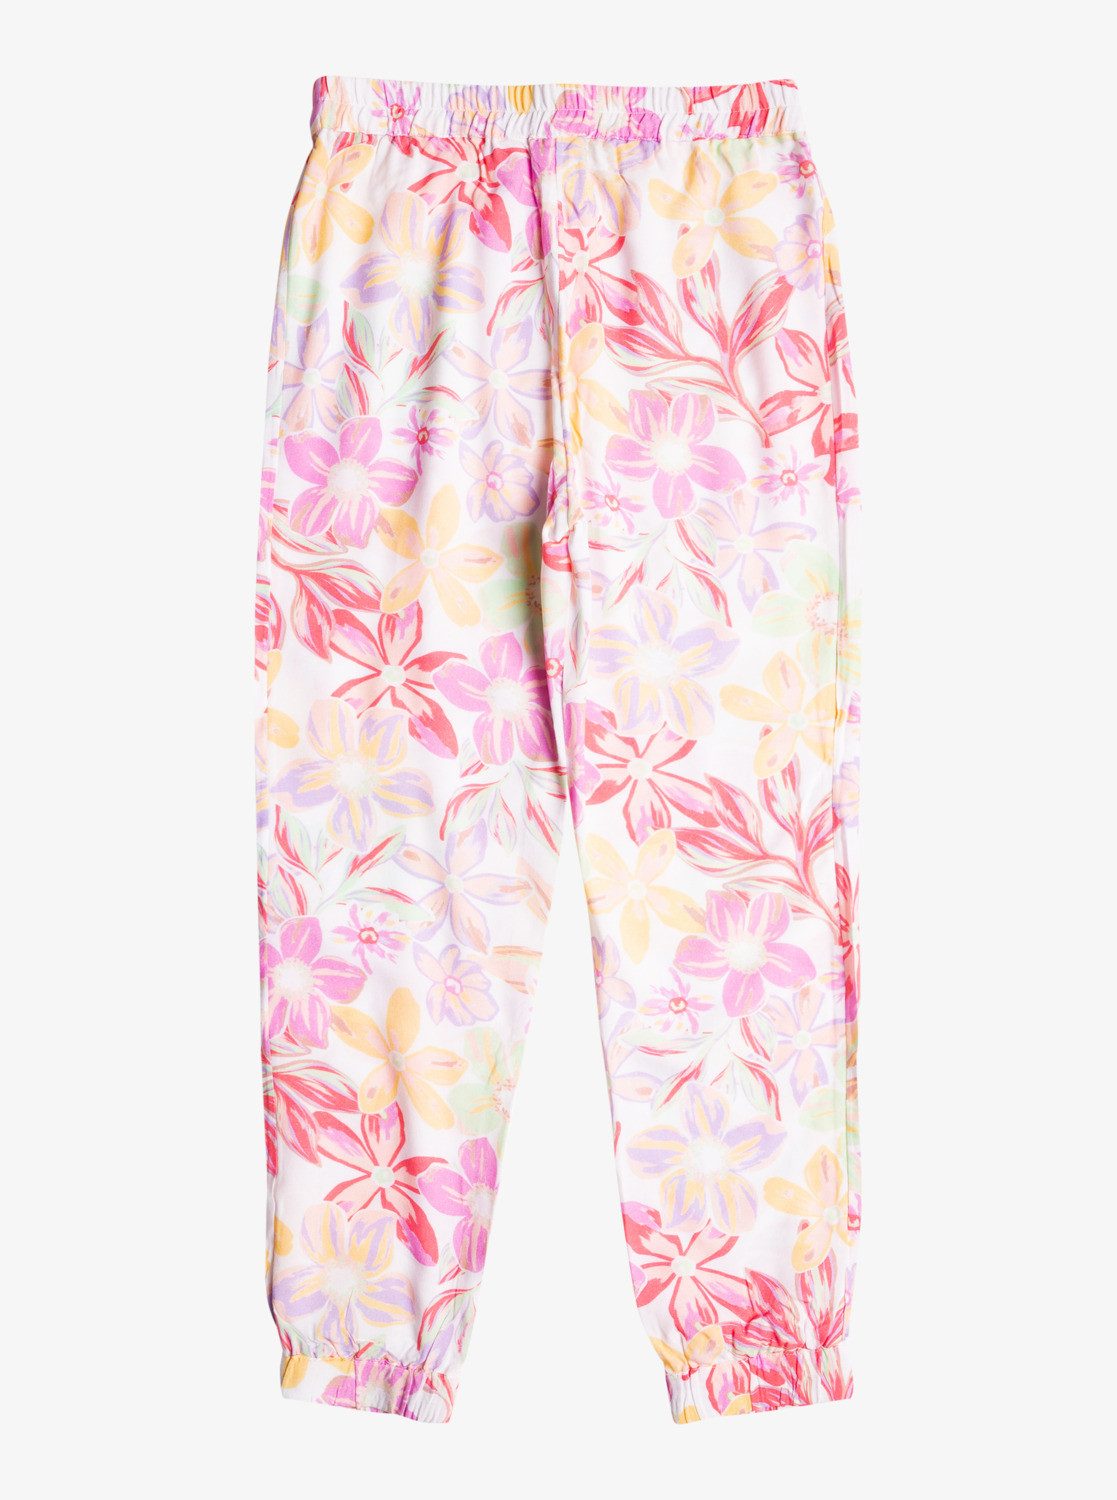 Girl Bayside Blooms New White Relaxhose Roxy Bright